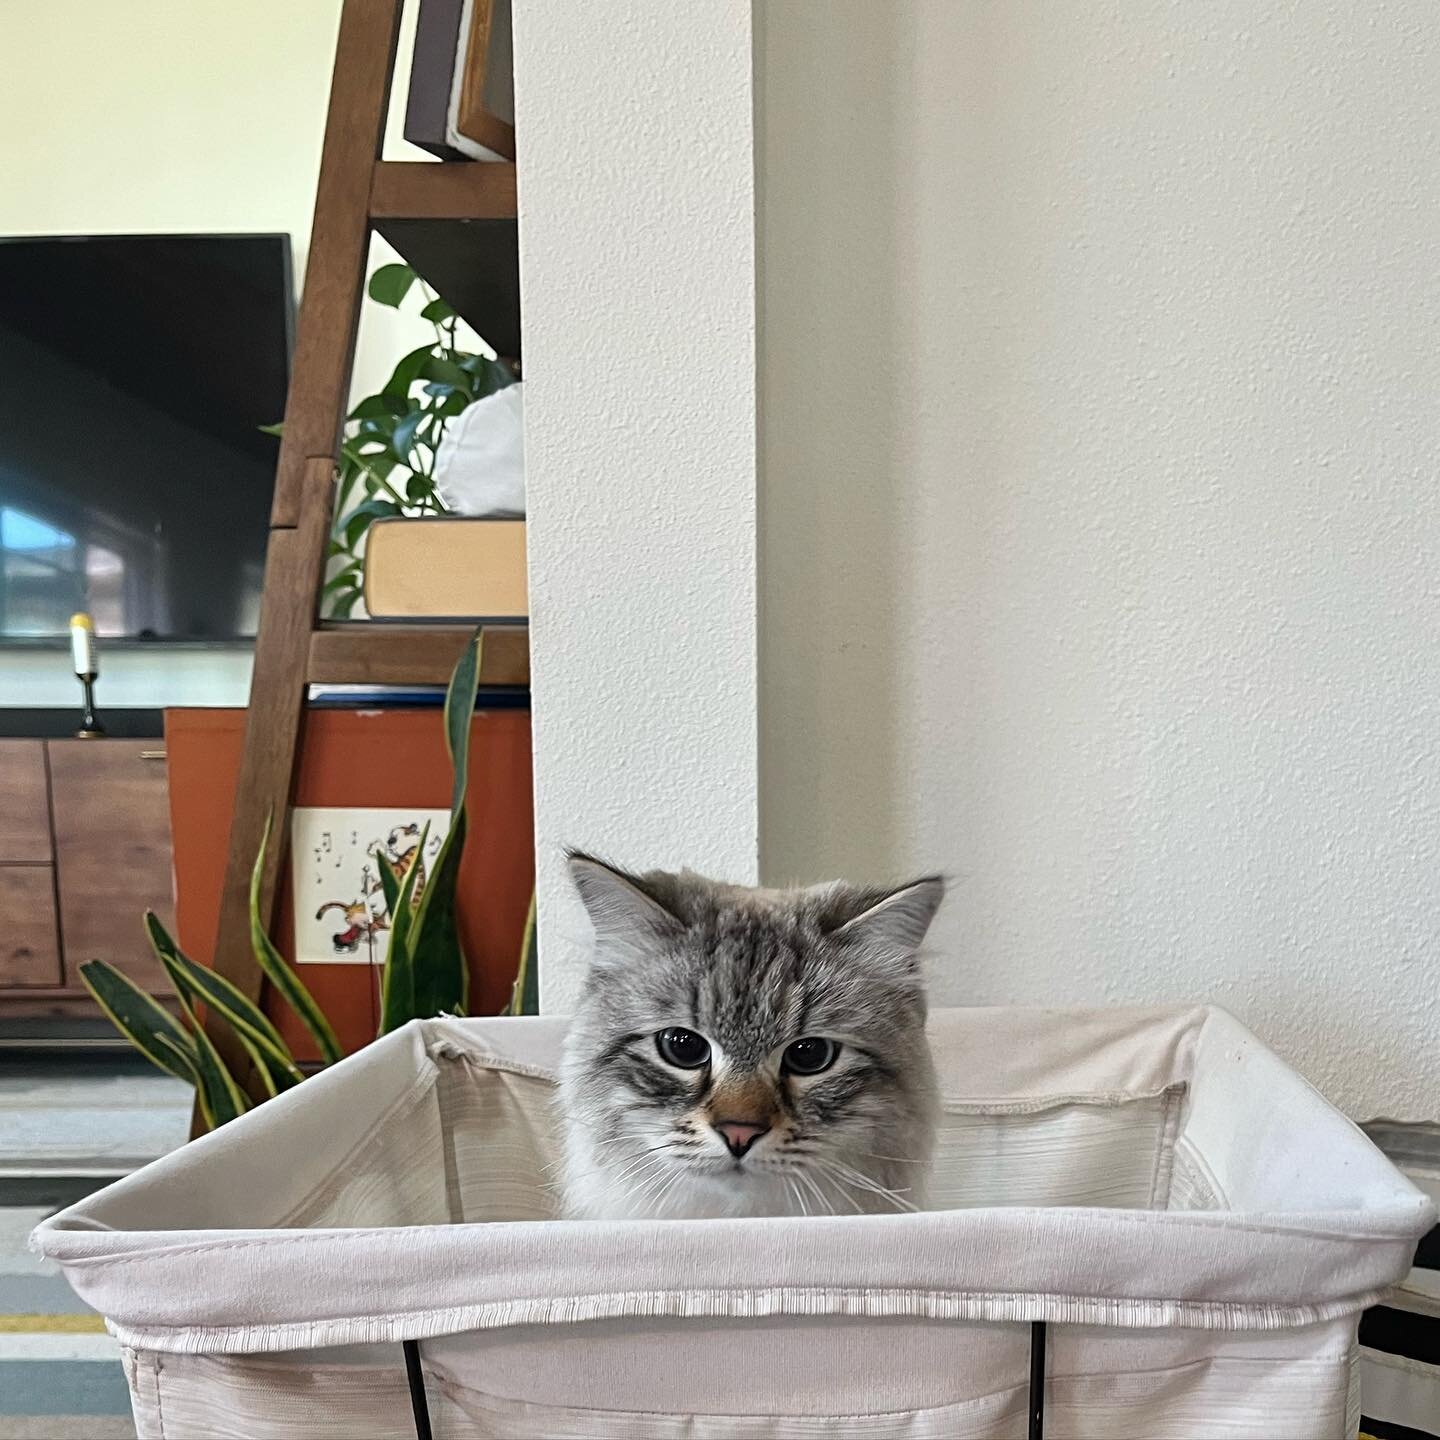 Lots of folks responded to my last post, about the link between activity and mental health&hellip; sooooo expect more of those! I smell infographics incoming

Medium-related, here is a picture of our cat, Fig, in a hamper. This is a sure fire seroton